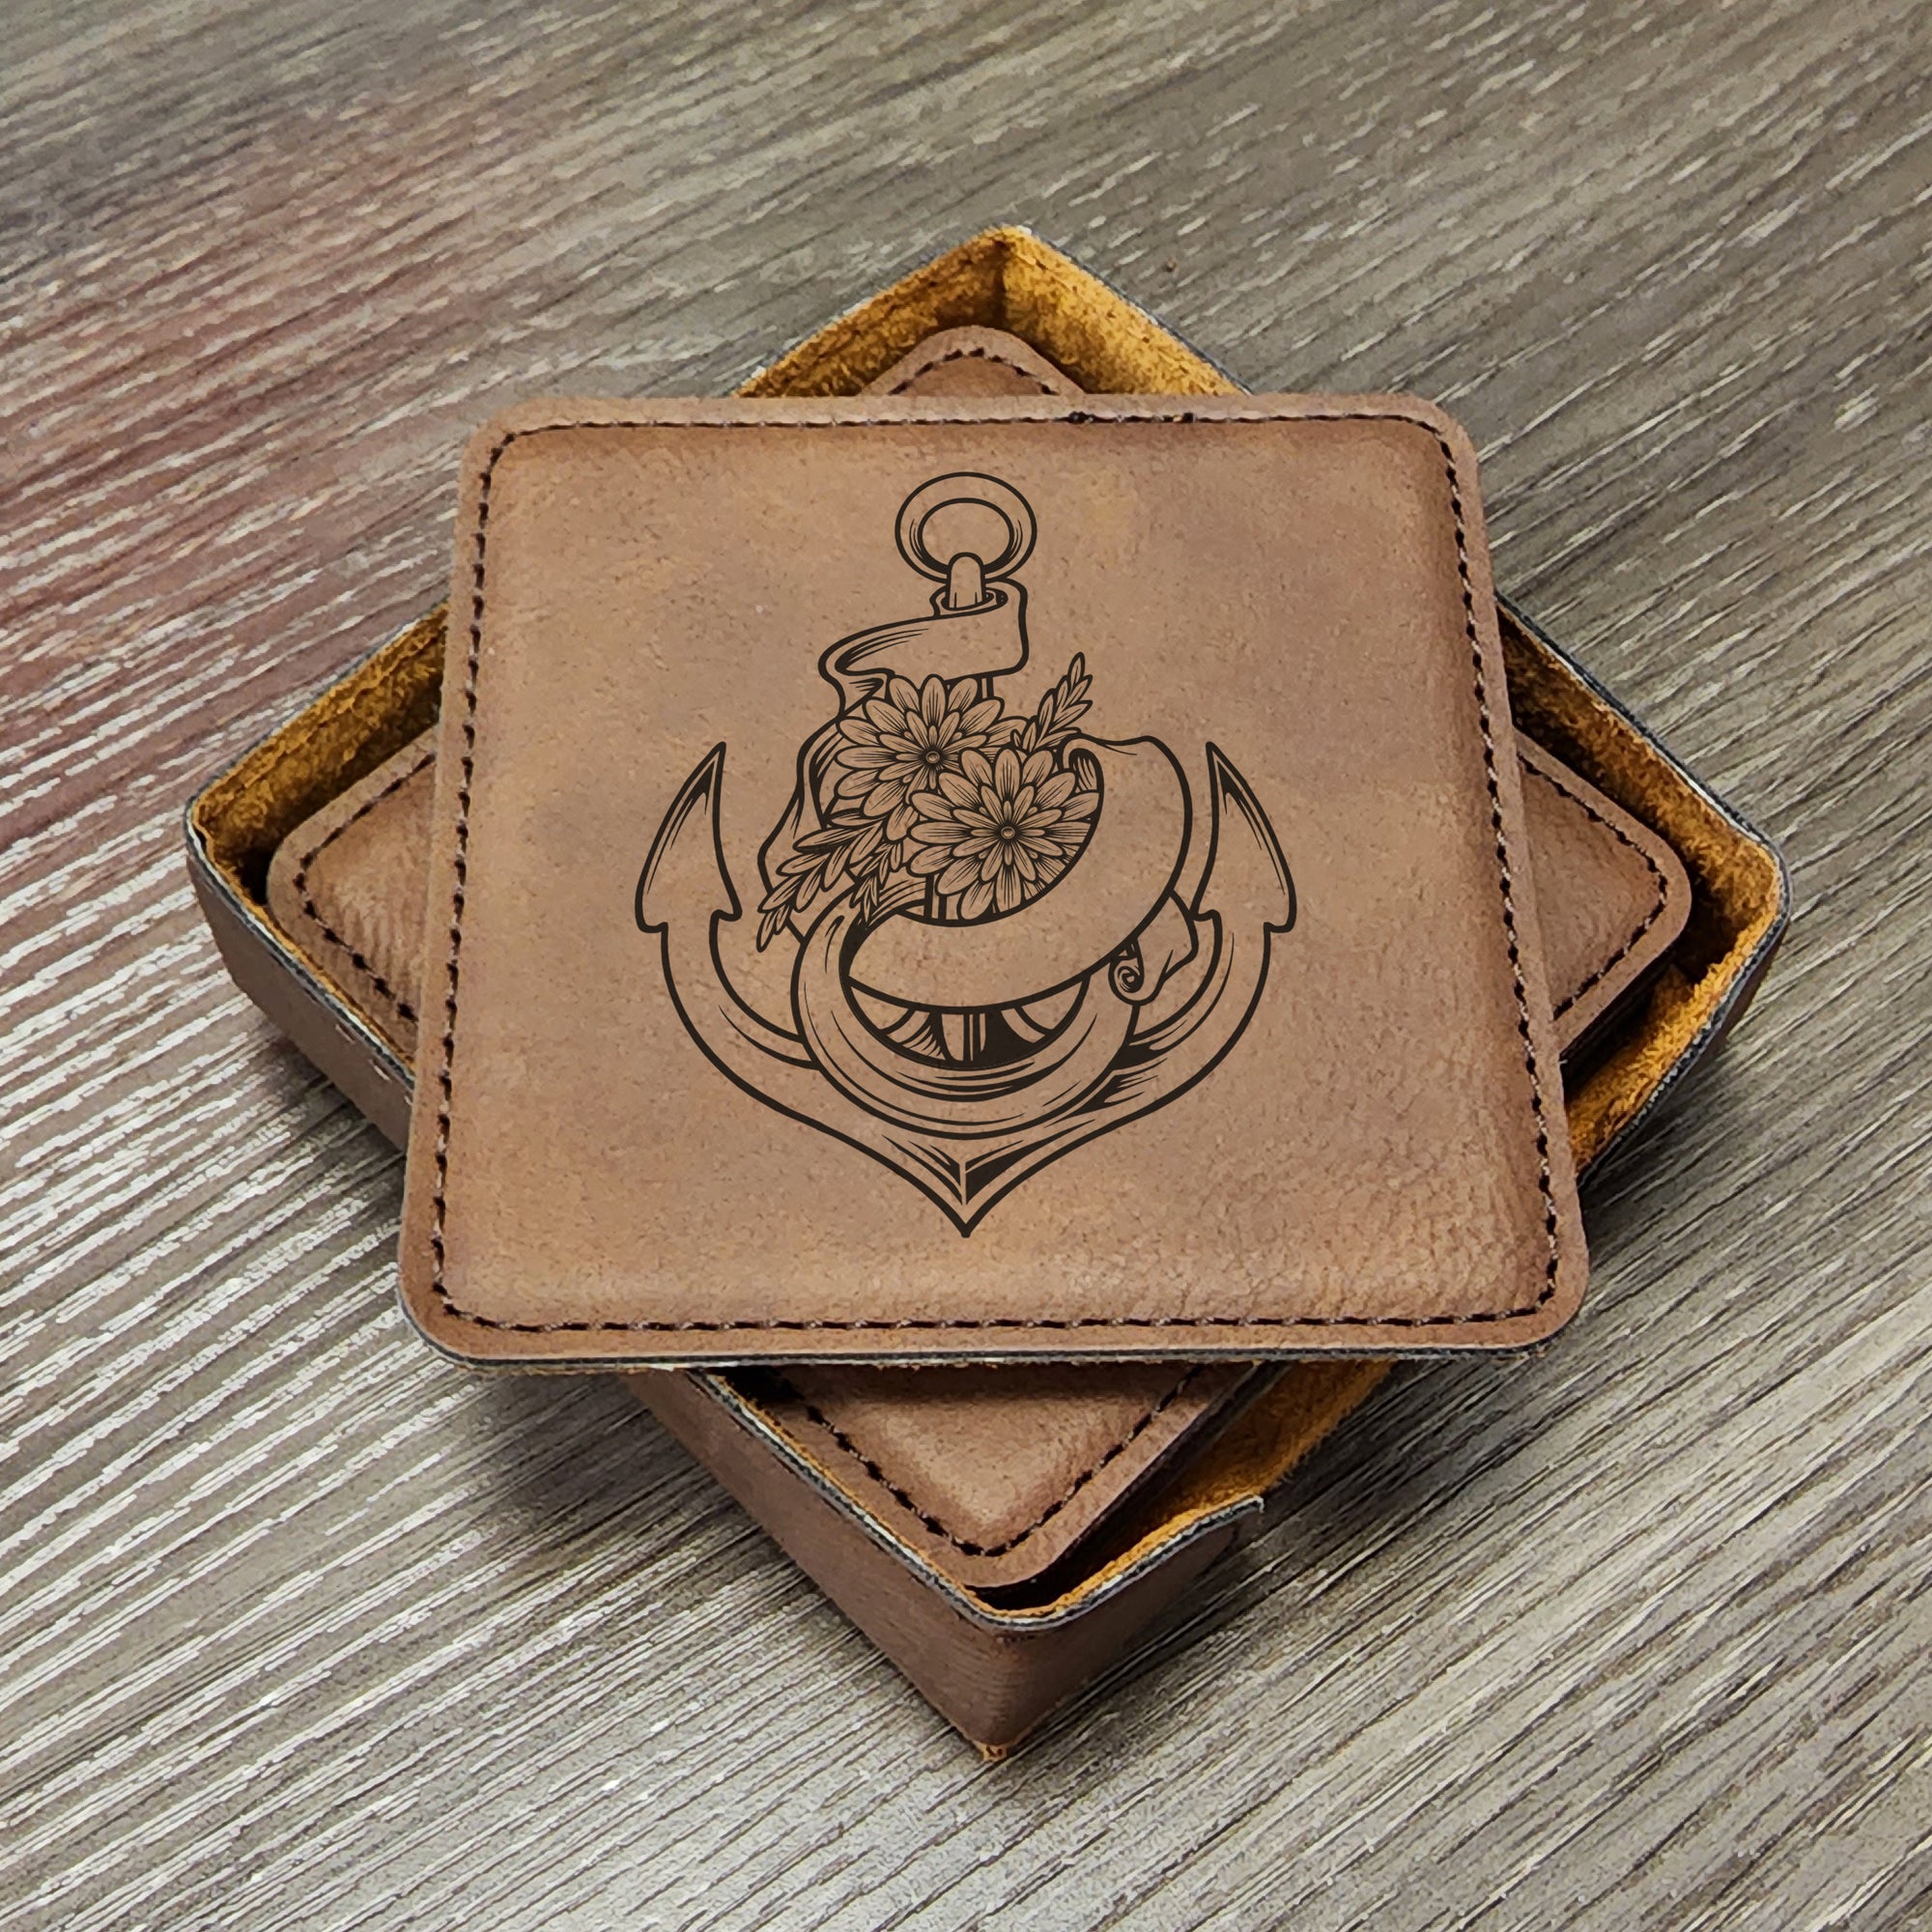 Sailing Anchor Leather Coaster, Boating Coaster, Nautical Coaster, Coasters for Vacation Home, Father's Day Gifts, Set of 6 With Holder